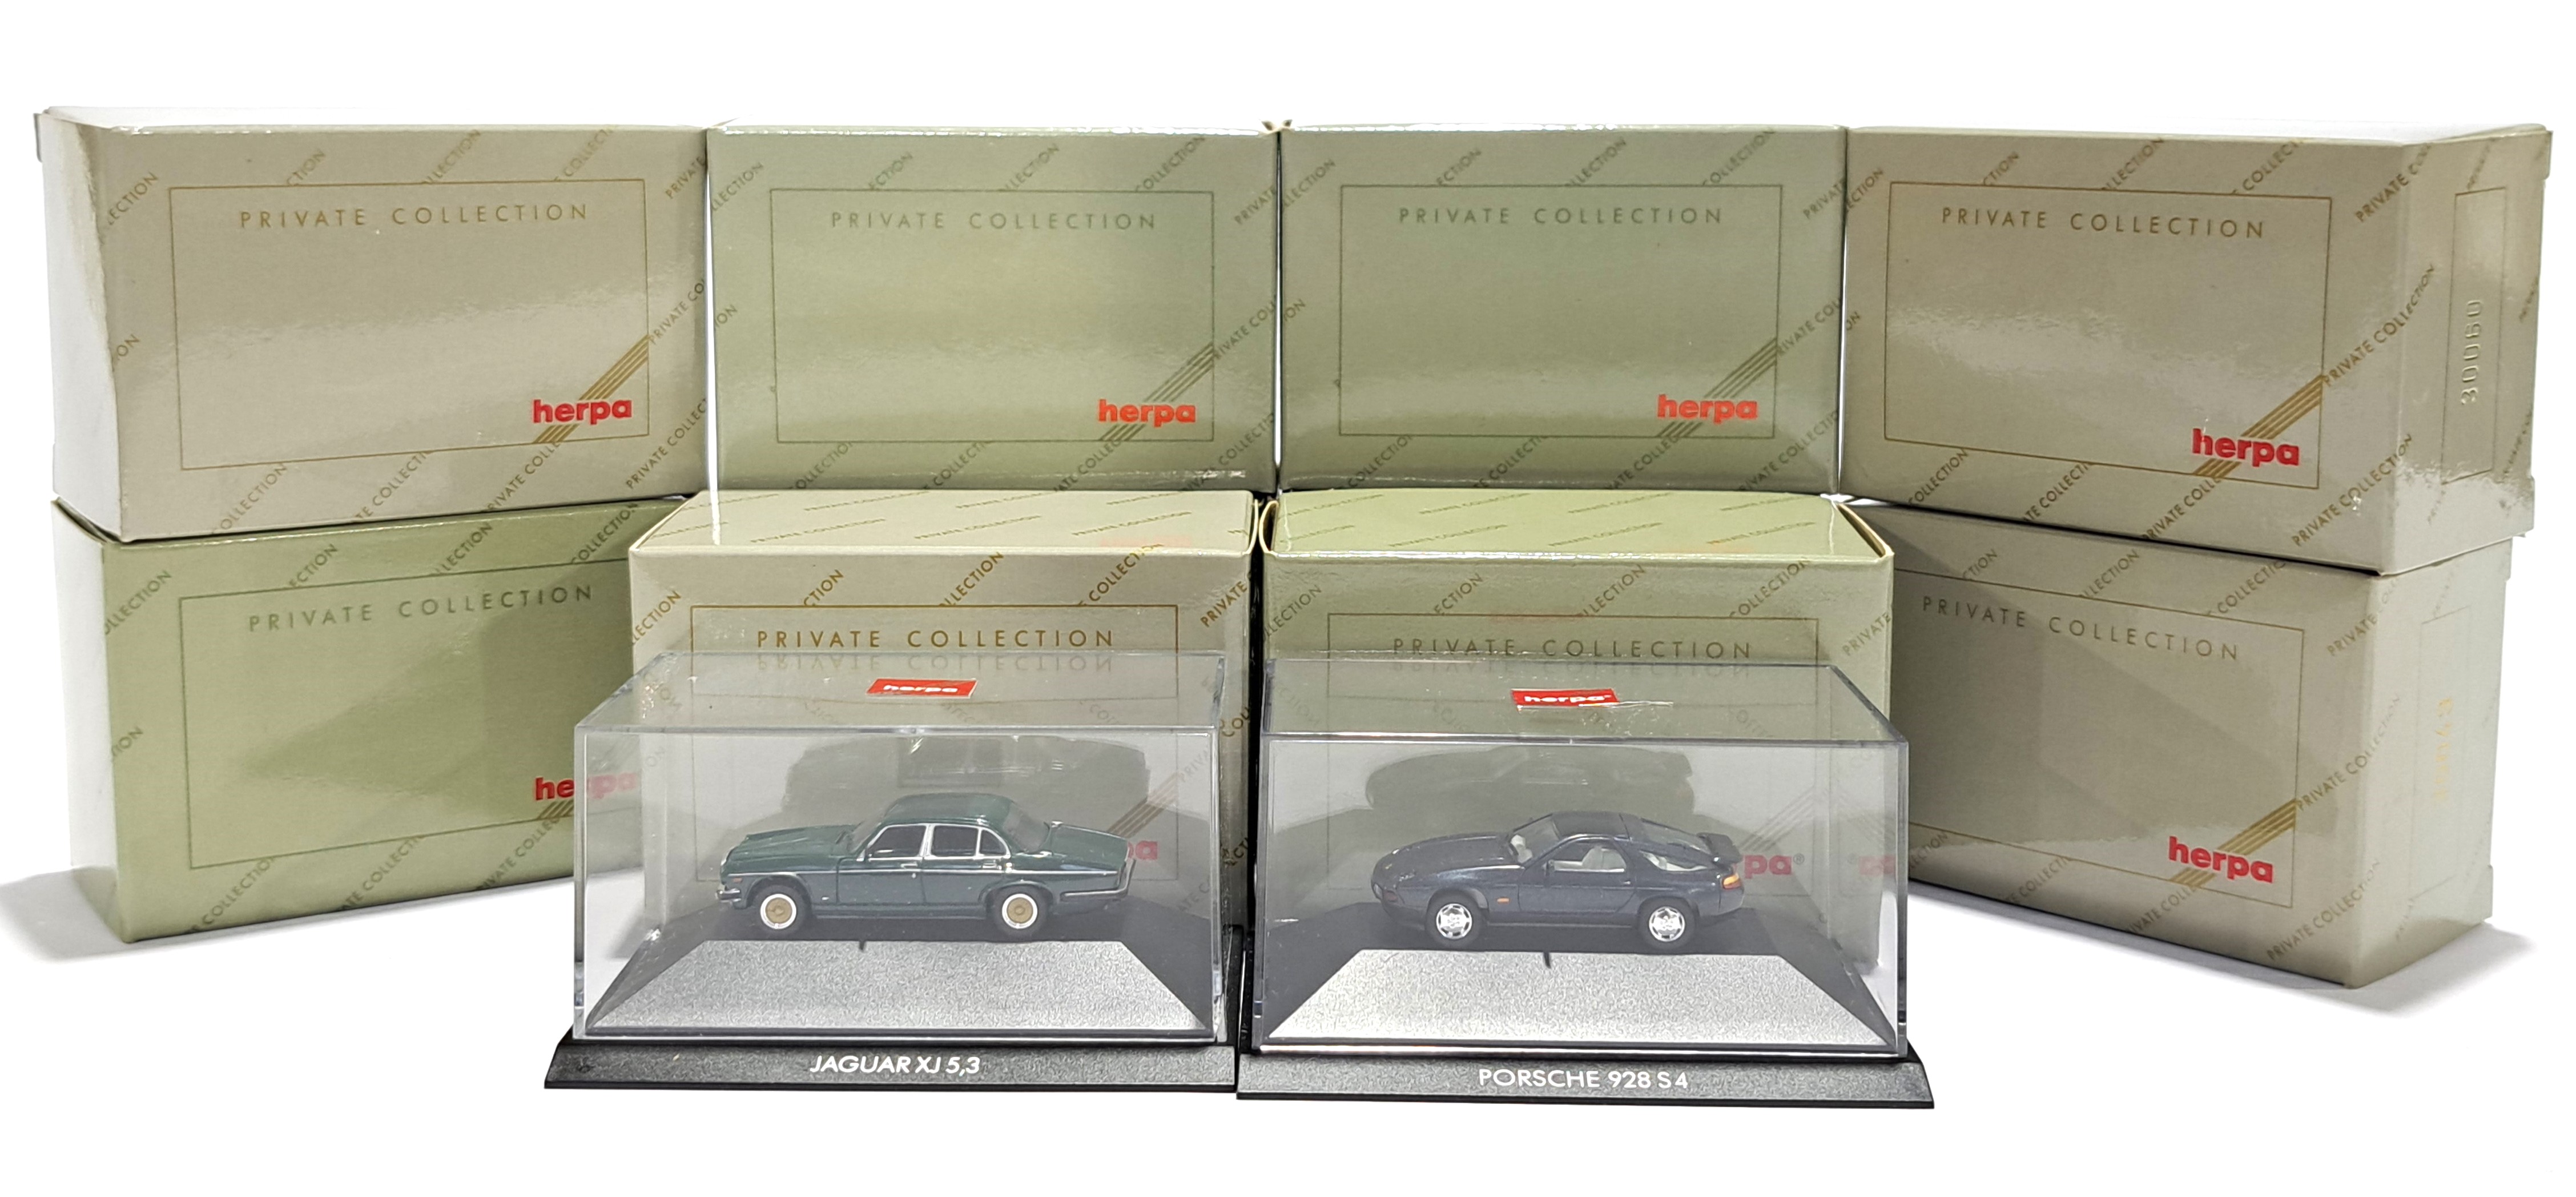 Herpa "Private Collection" & "Exclusiv Serie" and similar 1/87 scale diecast cars - Image 2 of 4